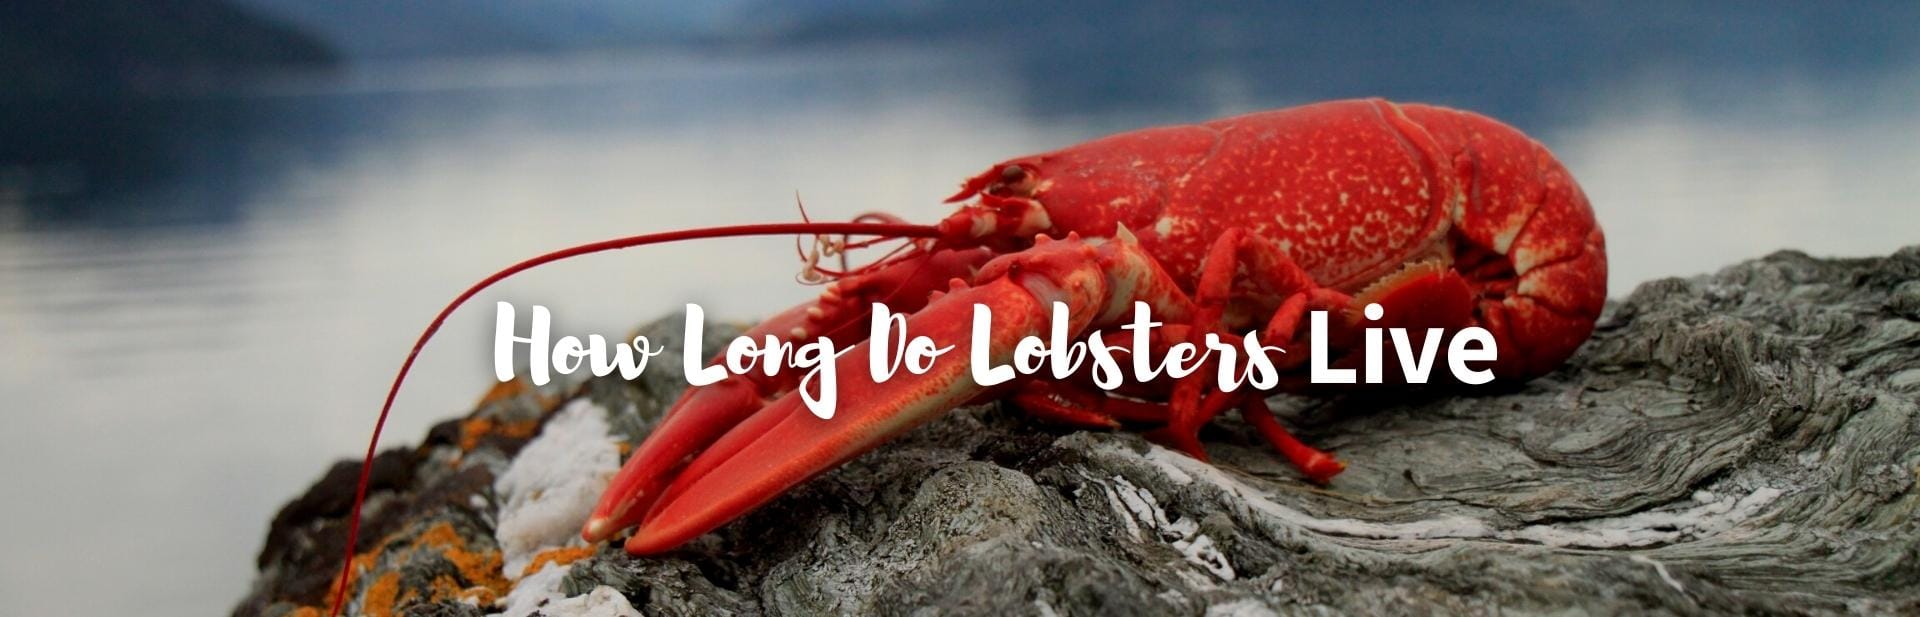 How Long Do Lobsters Live: Immortal or Just Long-Lived?